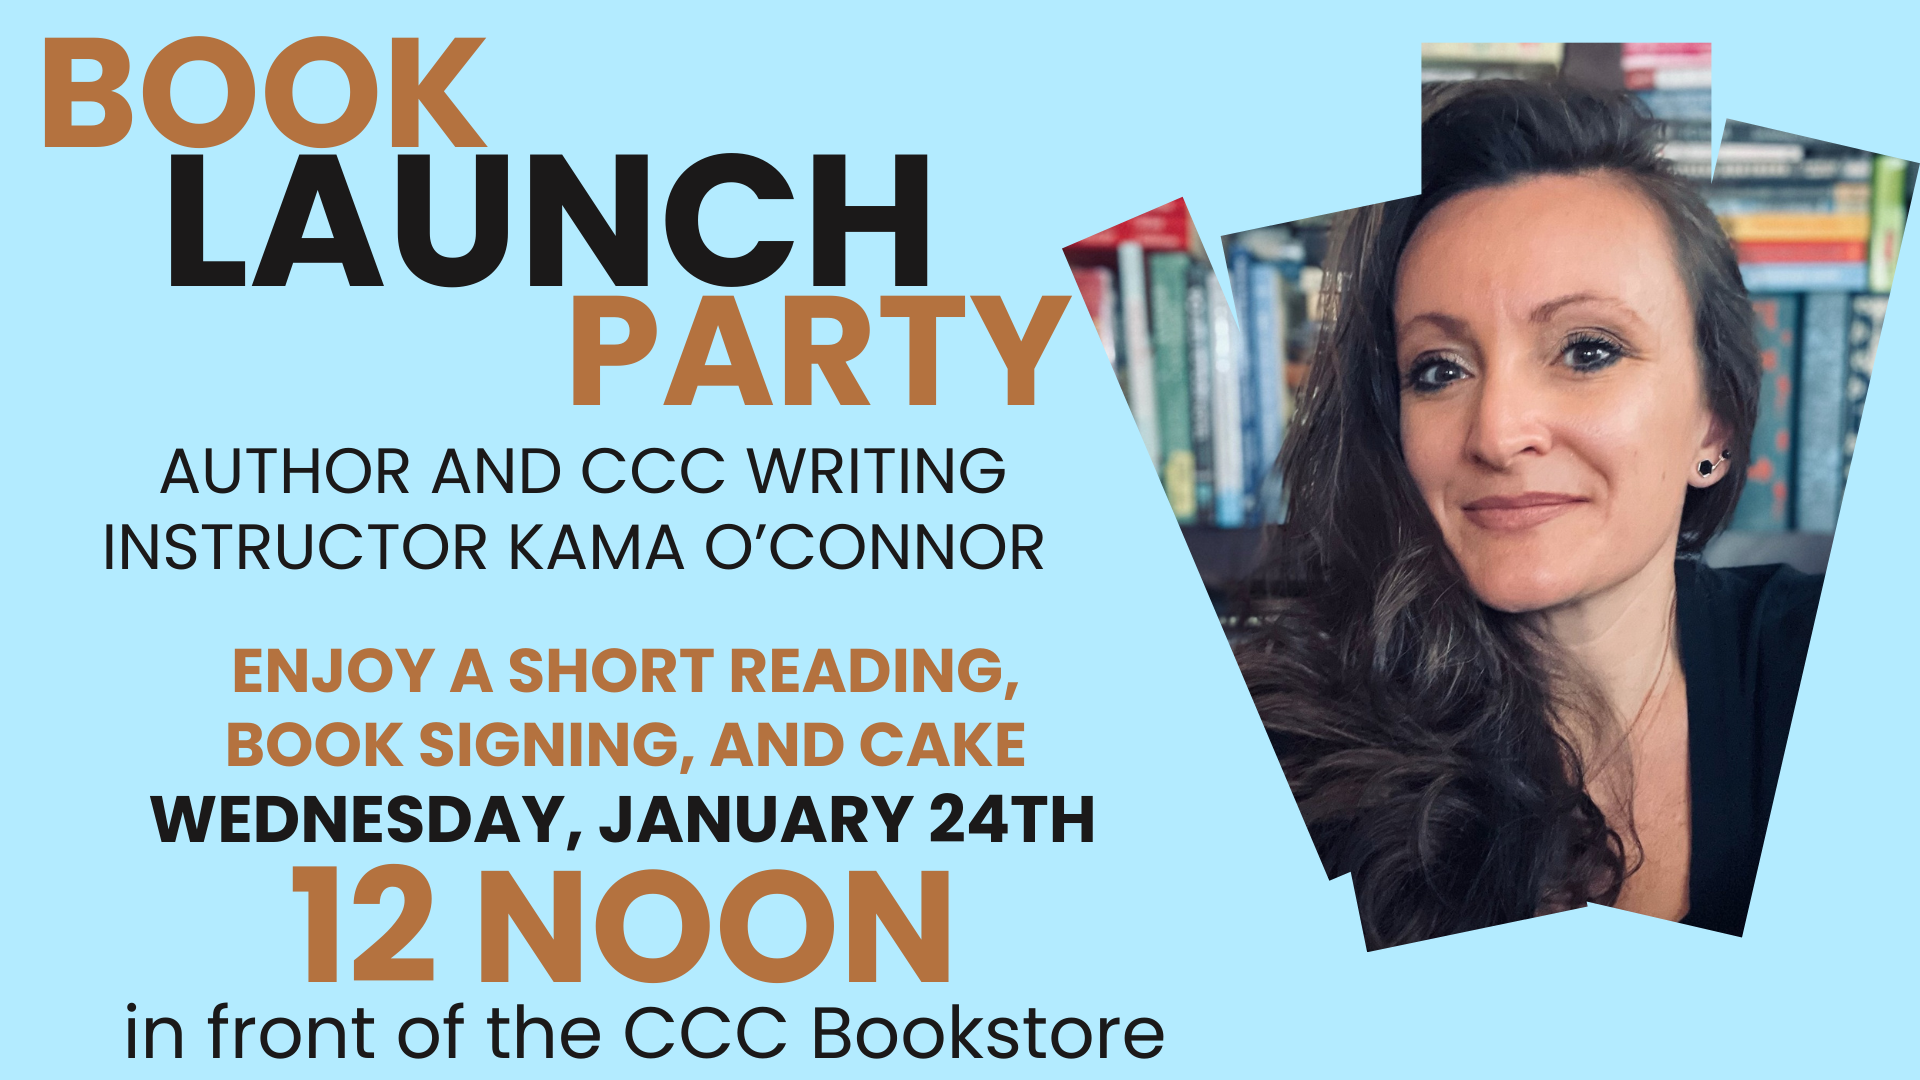 Book launch party ad with photo of Kama O'Connor and event details